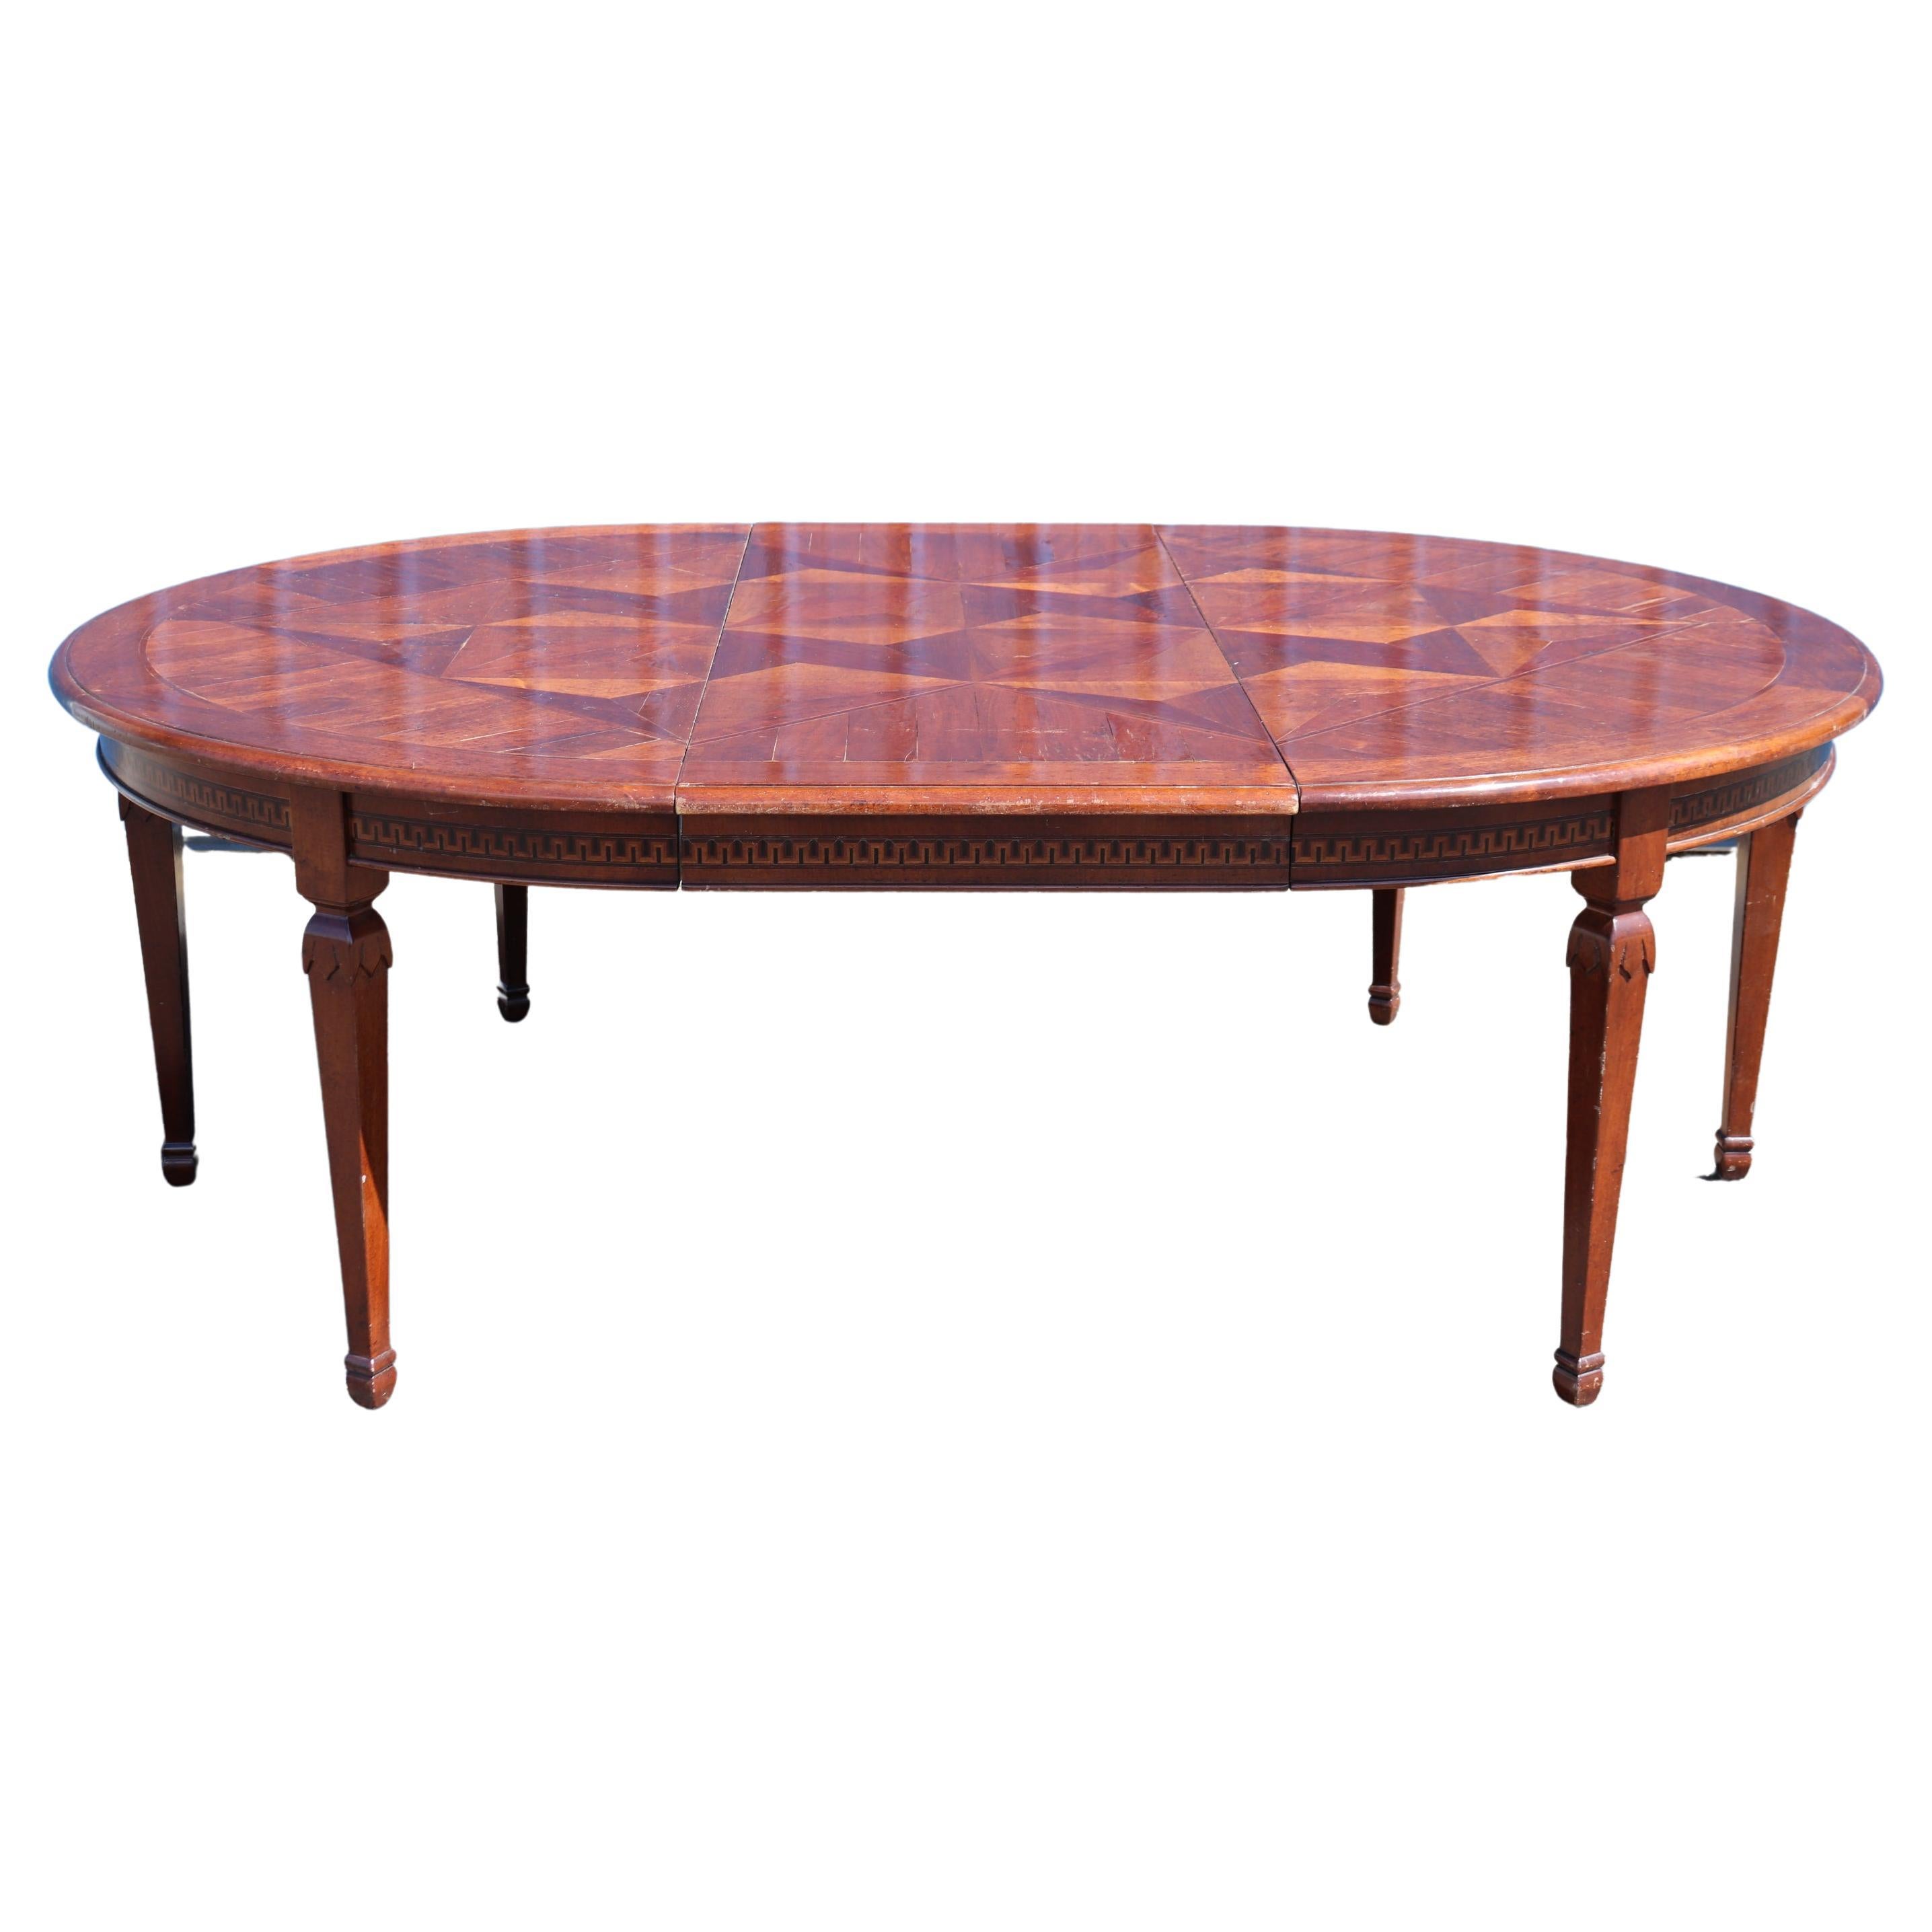 Fine Quality Italian Provincial Paquetry Walnut Dining Table W Leaf For Sale